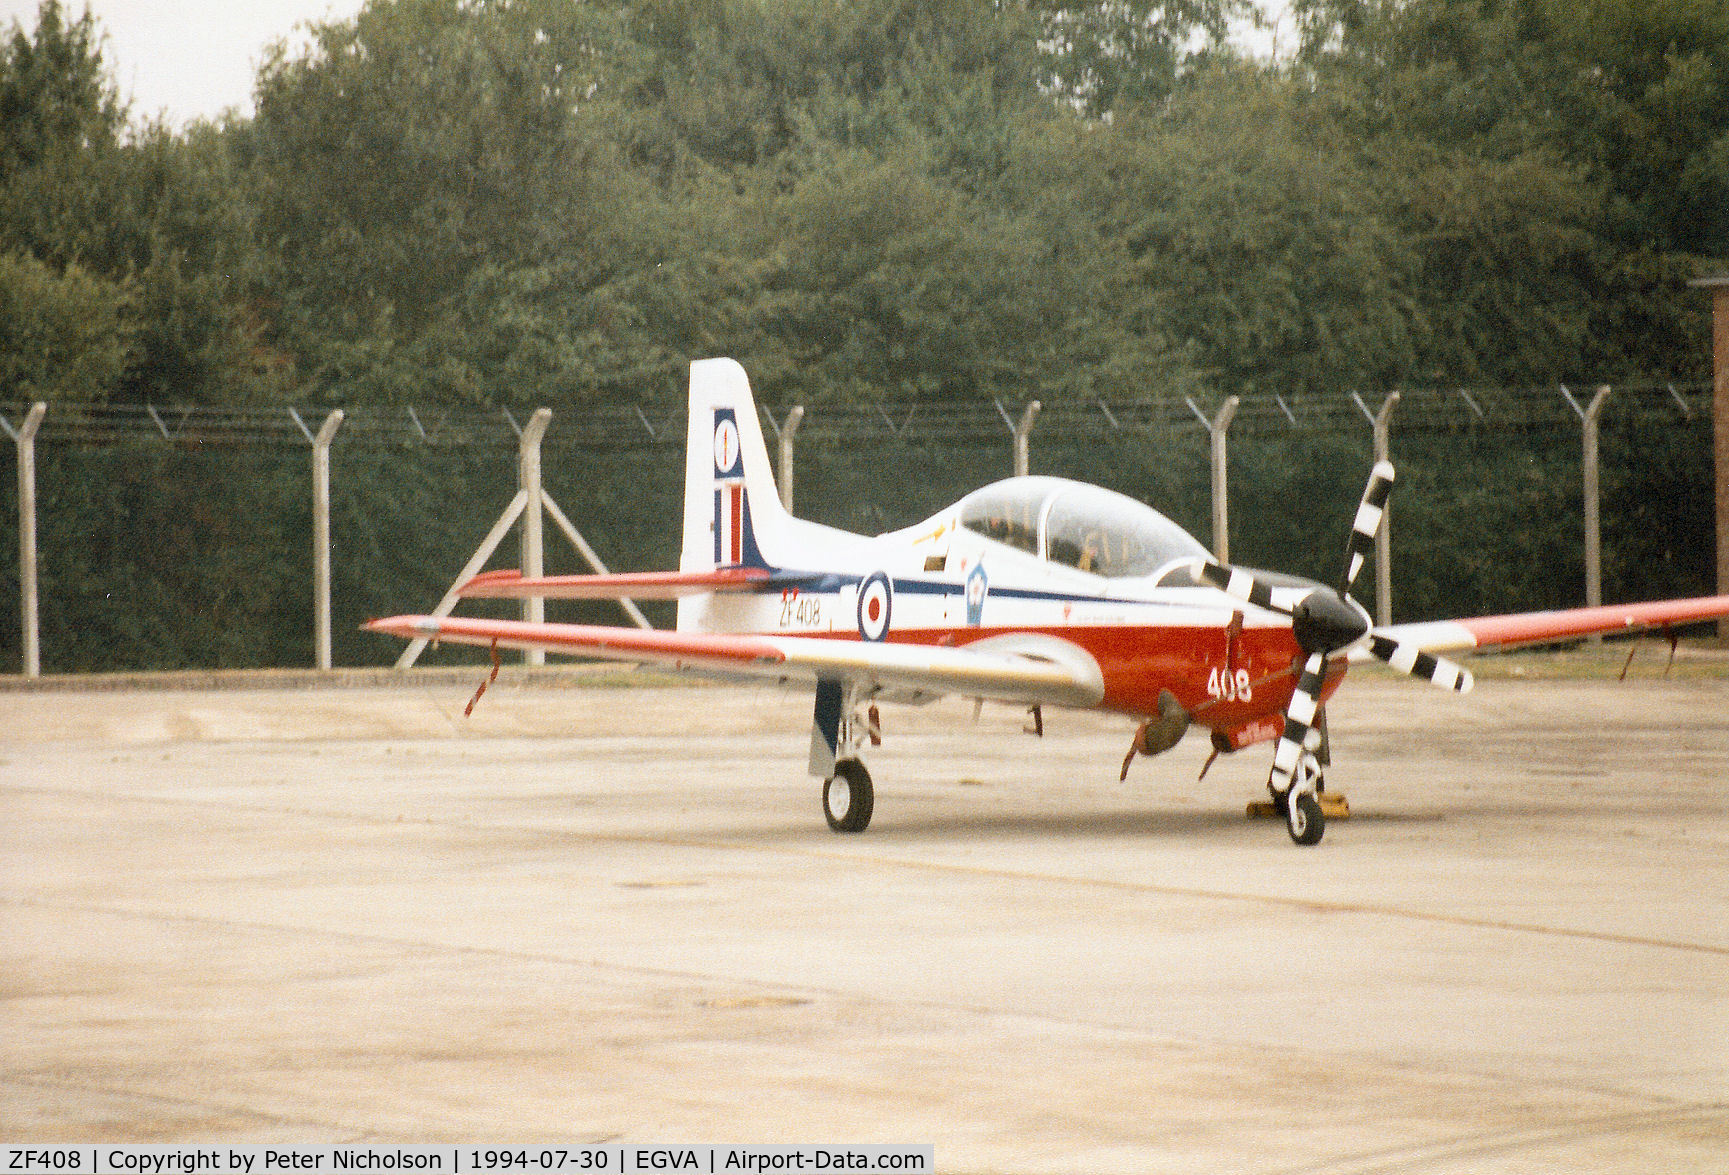 ZF408, 1992 Short S-312 Tucano T1 C/N S127/T98, Tucano T.1, callsign Blade 2, of 1 Flying Training School based at RAF Linton-on-Ouse in 75th Anniversary markings on the flight-line at the 1994 Intnl Air Tattoo at RAF Fairford.